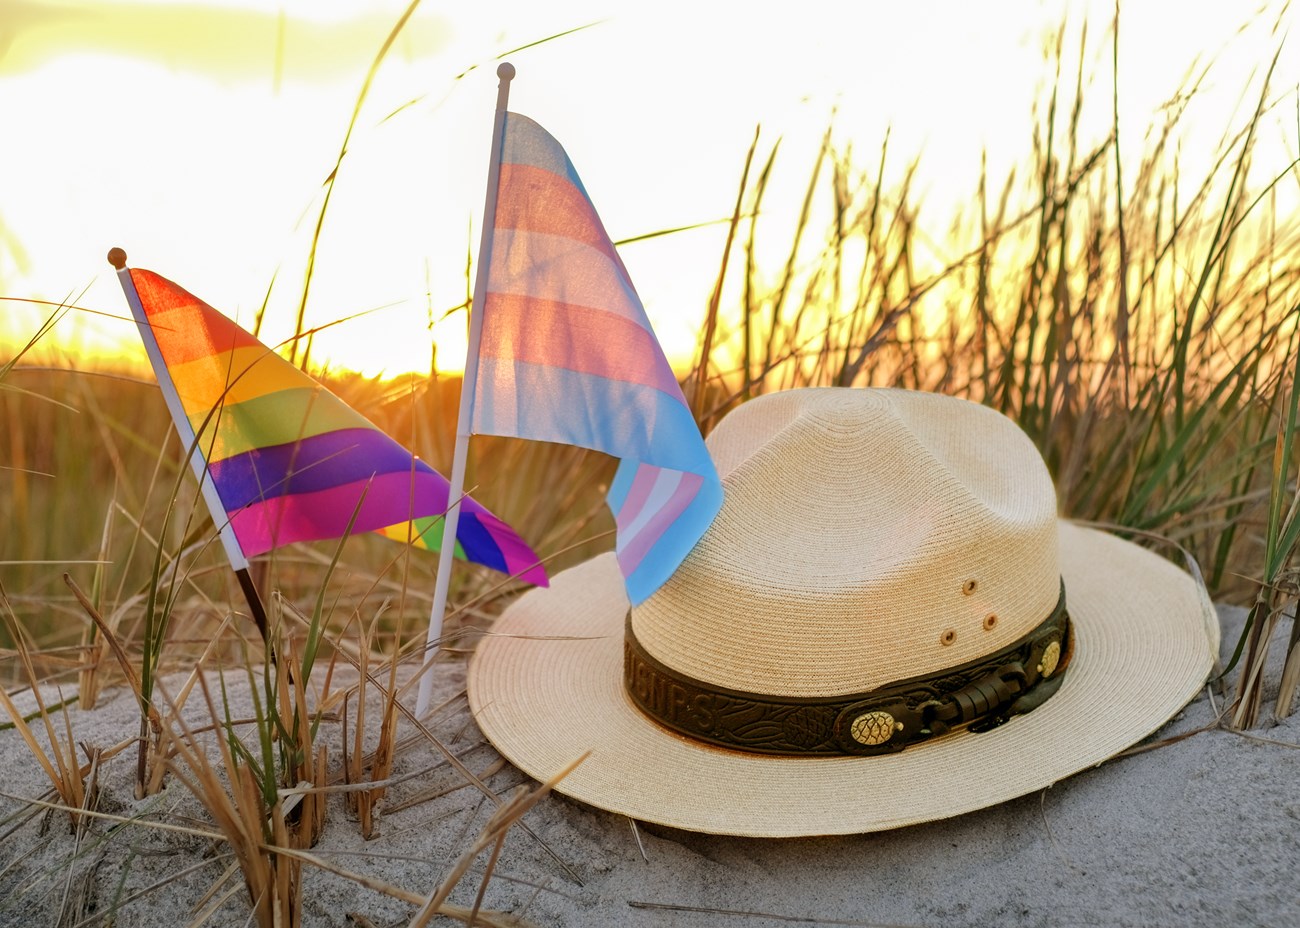 A park rangers flat hat sits atop a sandy dune with an LGBTQ pride flag and Transgender pride flag next to it.